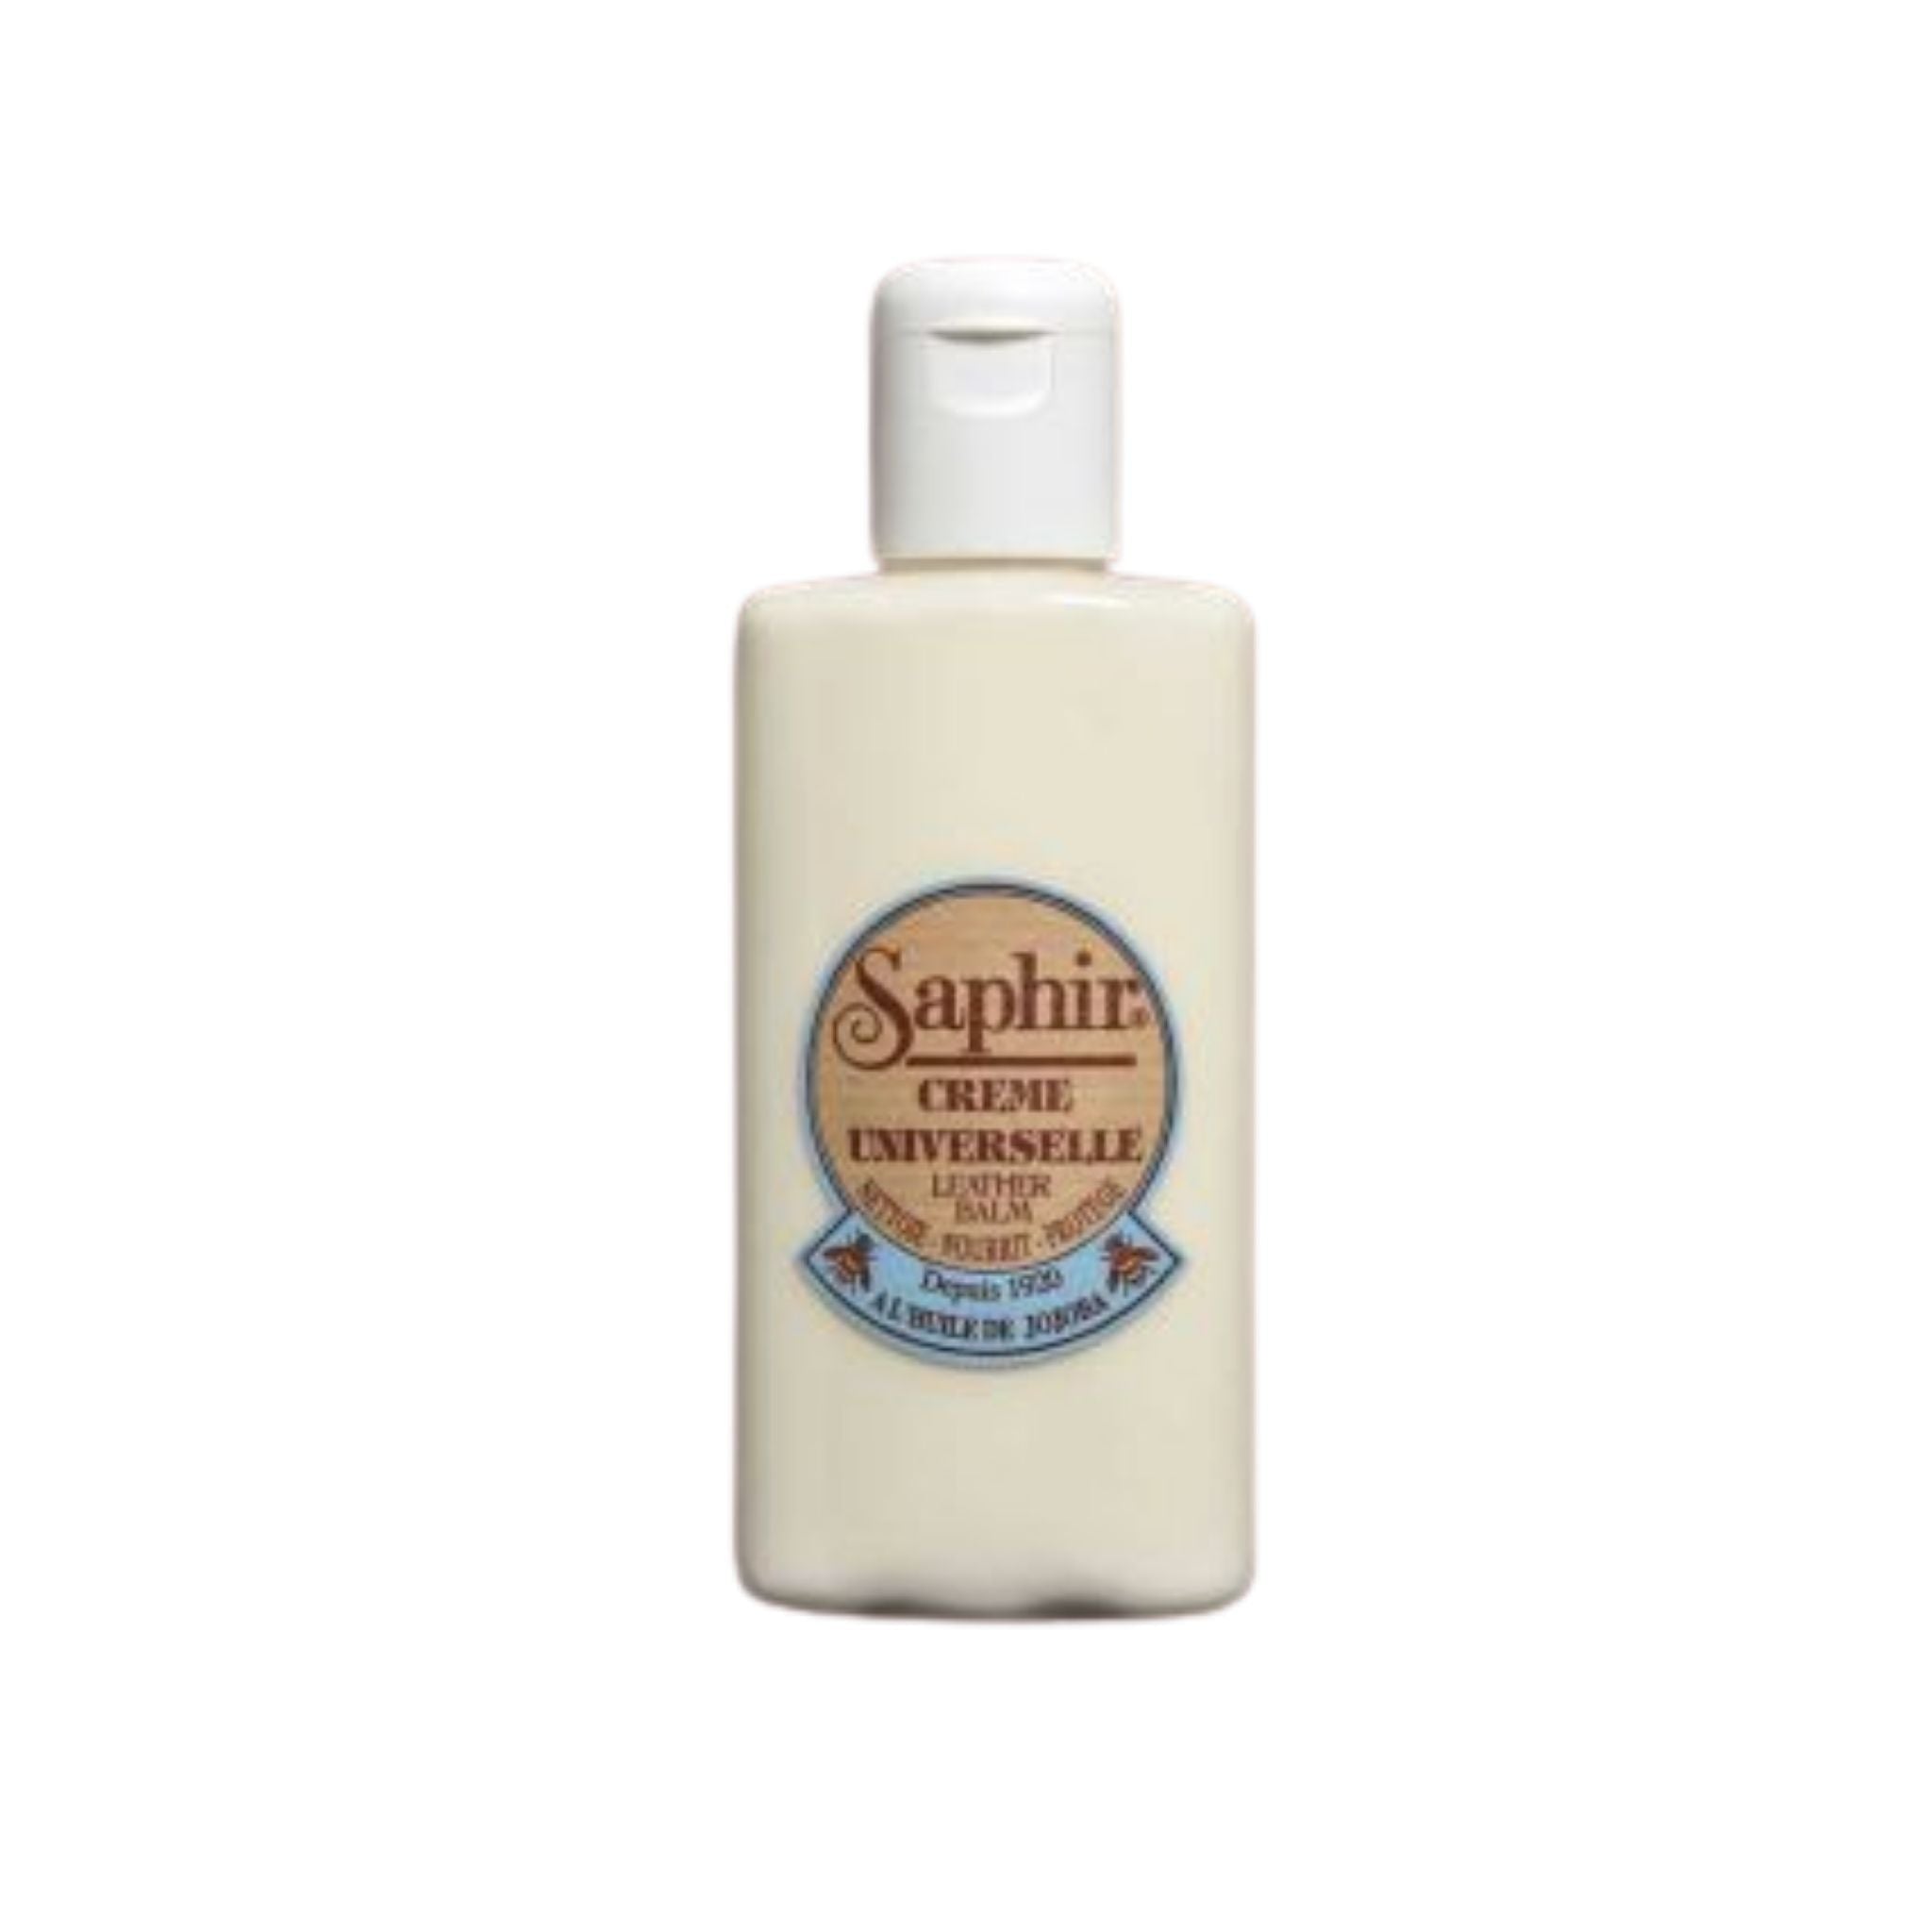 Saphir universal cream for leather conditioning. Stocked in Australia.